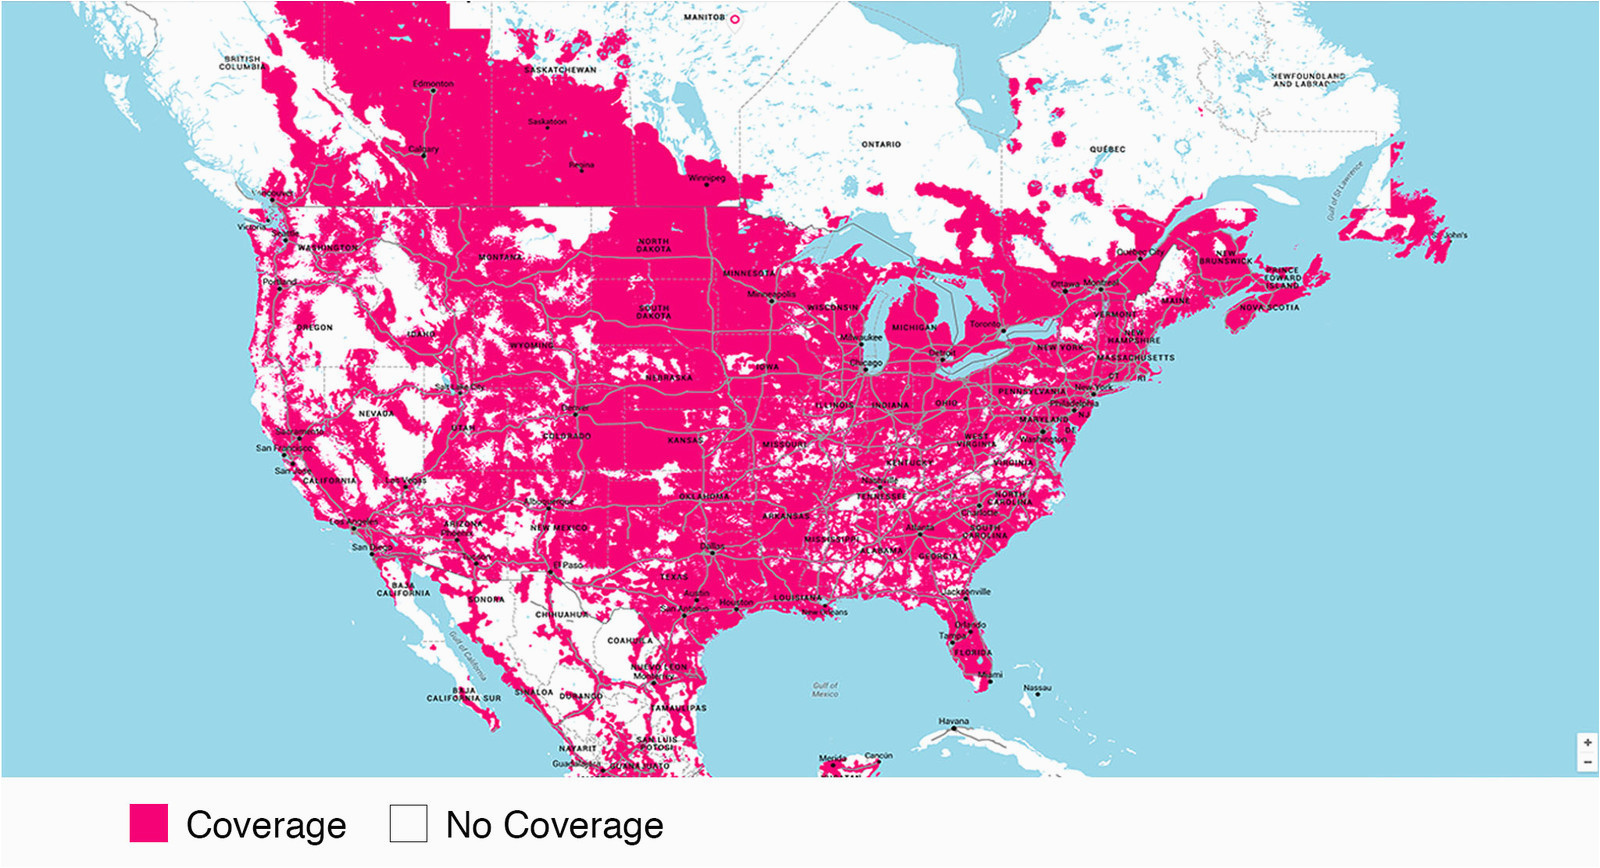 verizon cell coverage map lovely cell coverage map beautiful verizon